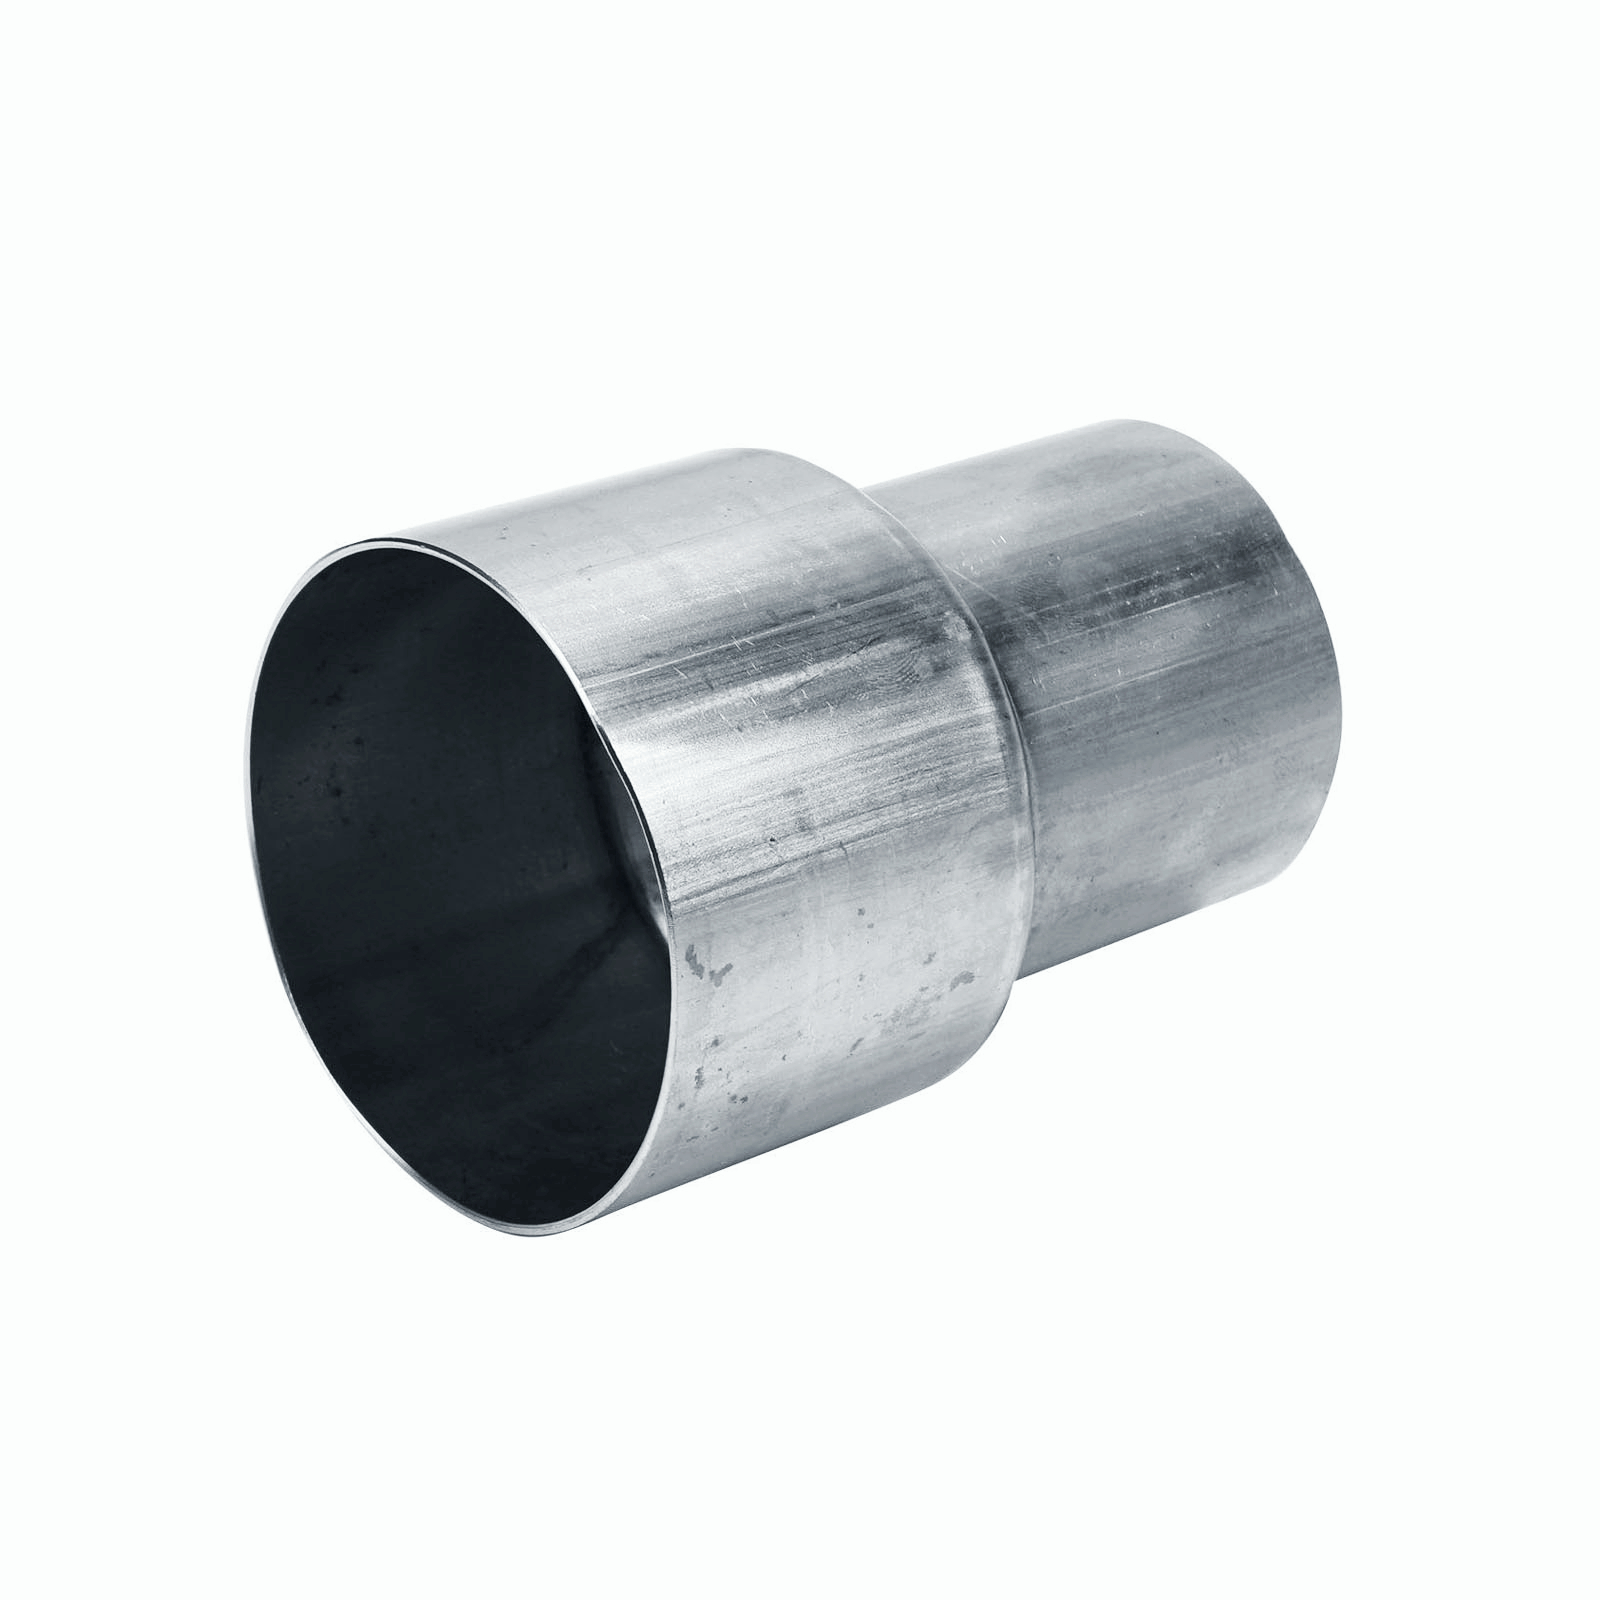 2.25" ID to 2.5" ID Exhaust Pipe to Pipe Adapter Reducer Universal Solid Component Adapter Connector